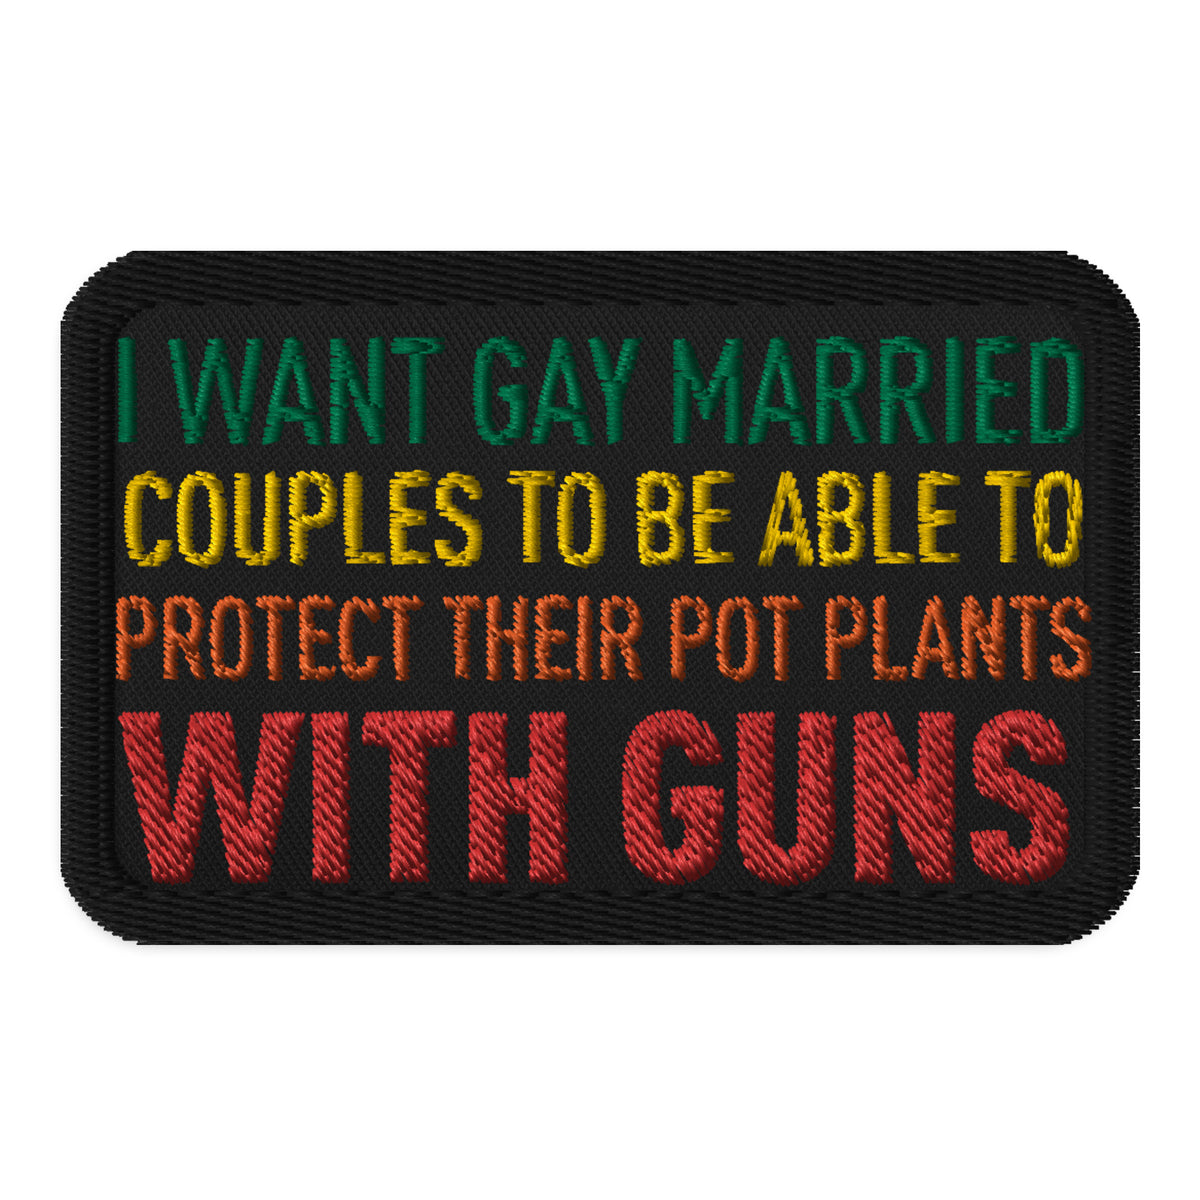 I Want Gay Married Couples To Protect Their Marijuana Plants With Guns Patch